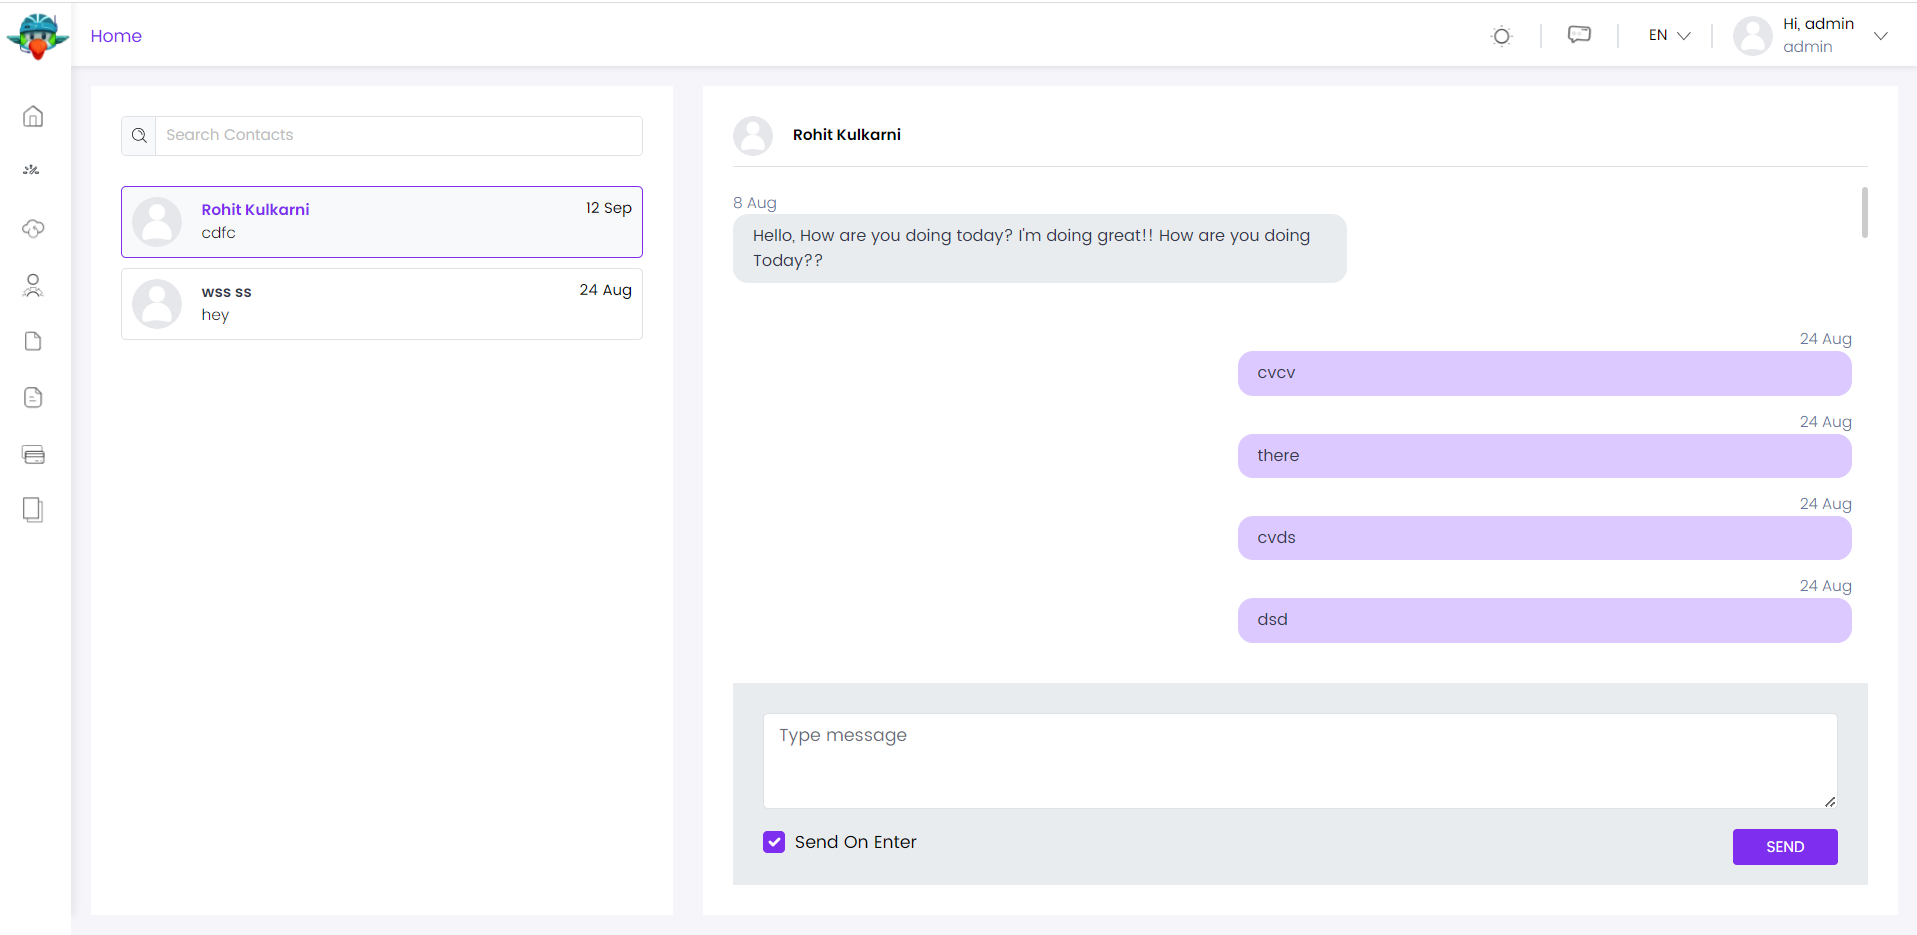 This is the page that users send messages to each other